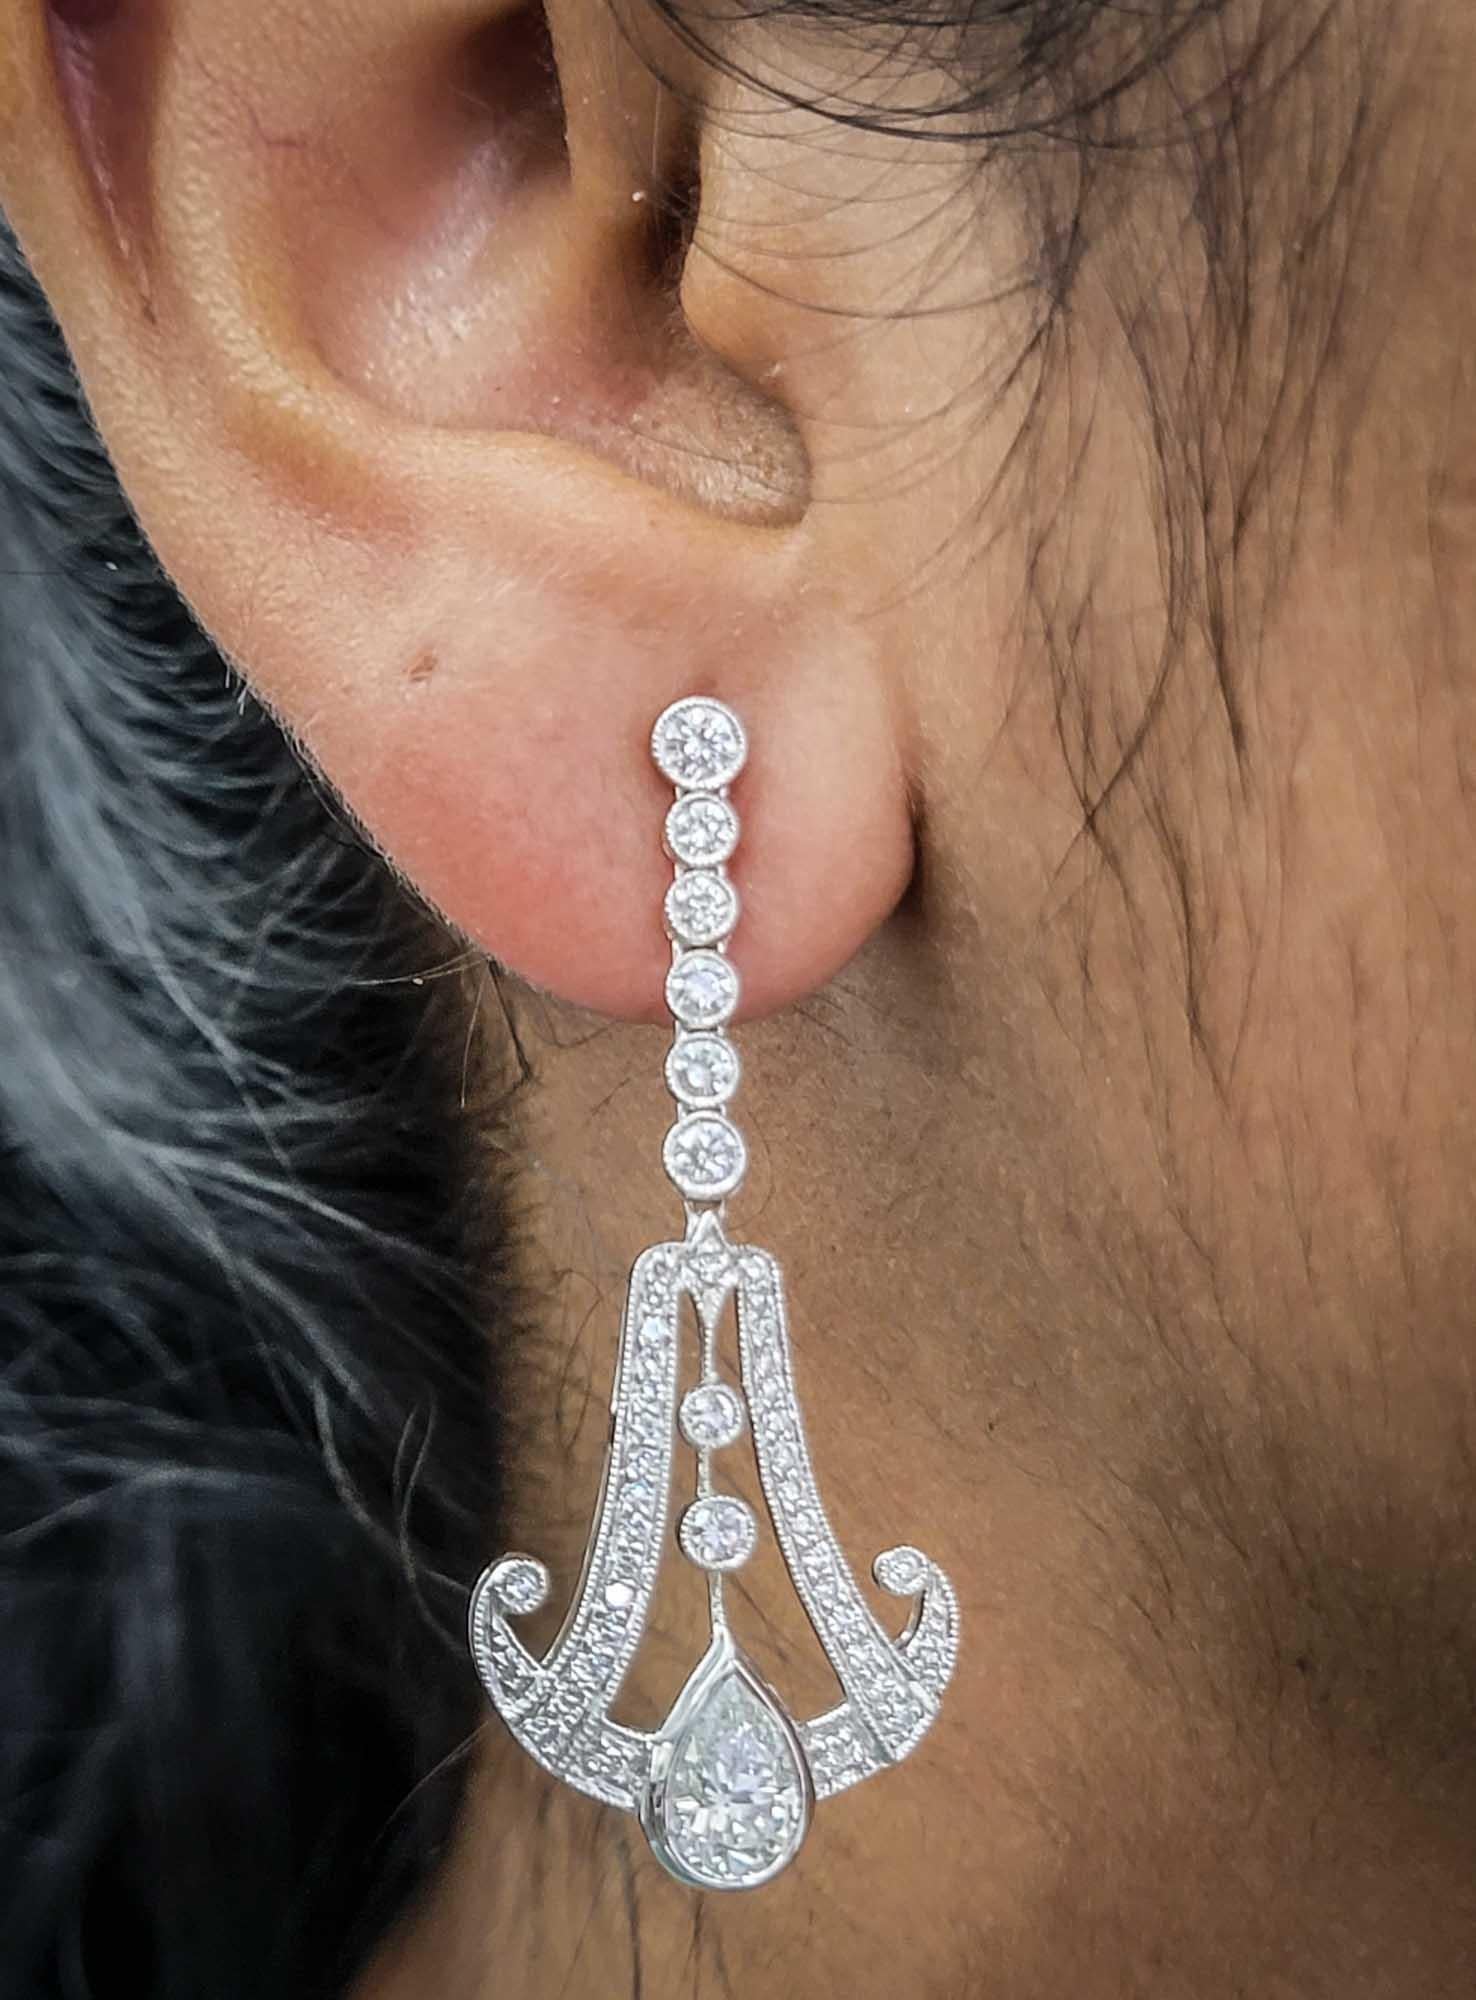 Diamond platinum earrings by Sophia D with pear cut diamonds weighing 1.44 carats and surrounding diamonds weighing 1.37 carats.

Sophia D by Joseph Dardashti LTD has been known worldwide for 35 years and are inspired by classic Art Deco design that